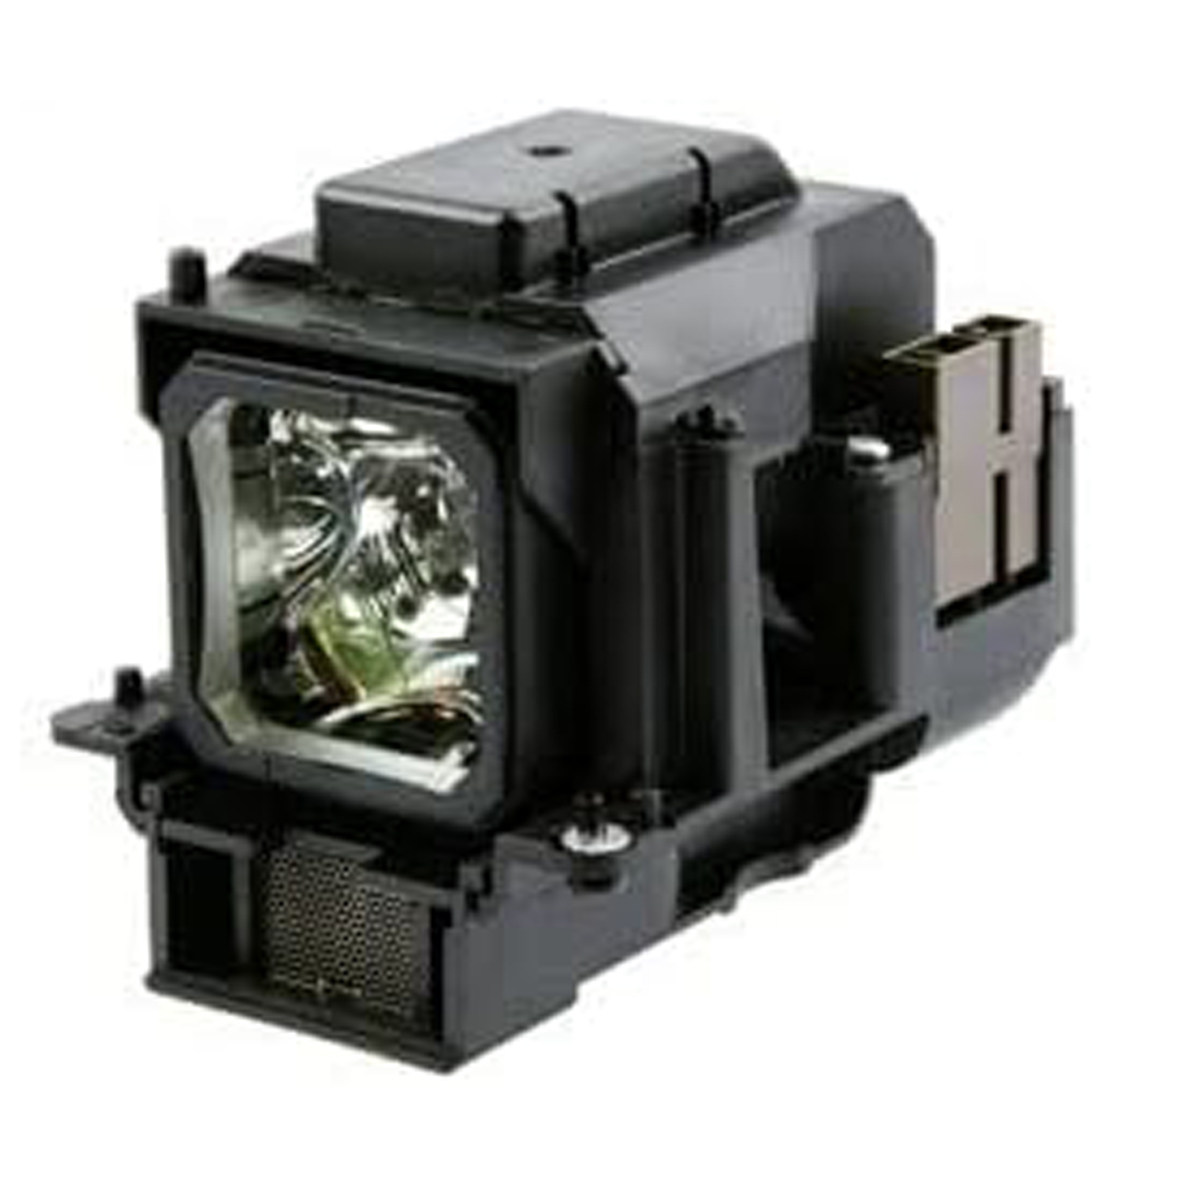 Replacement Projector lamp 01-00161 For SMARTBOARD 3000 DVX 2000i DVS 2000i DVX